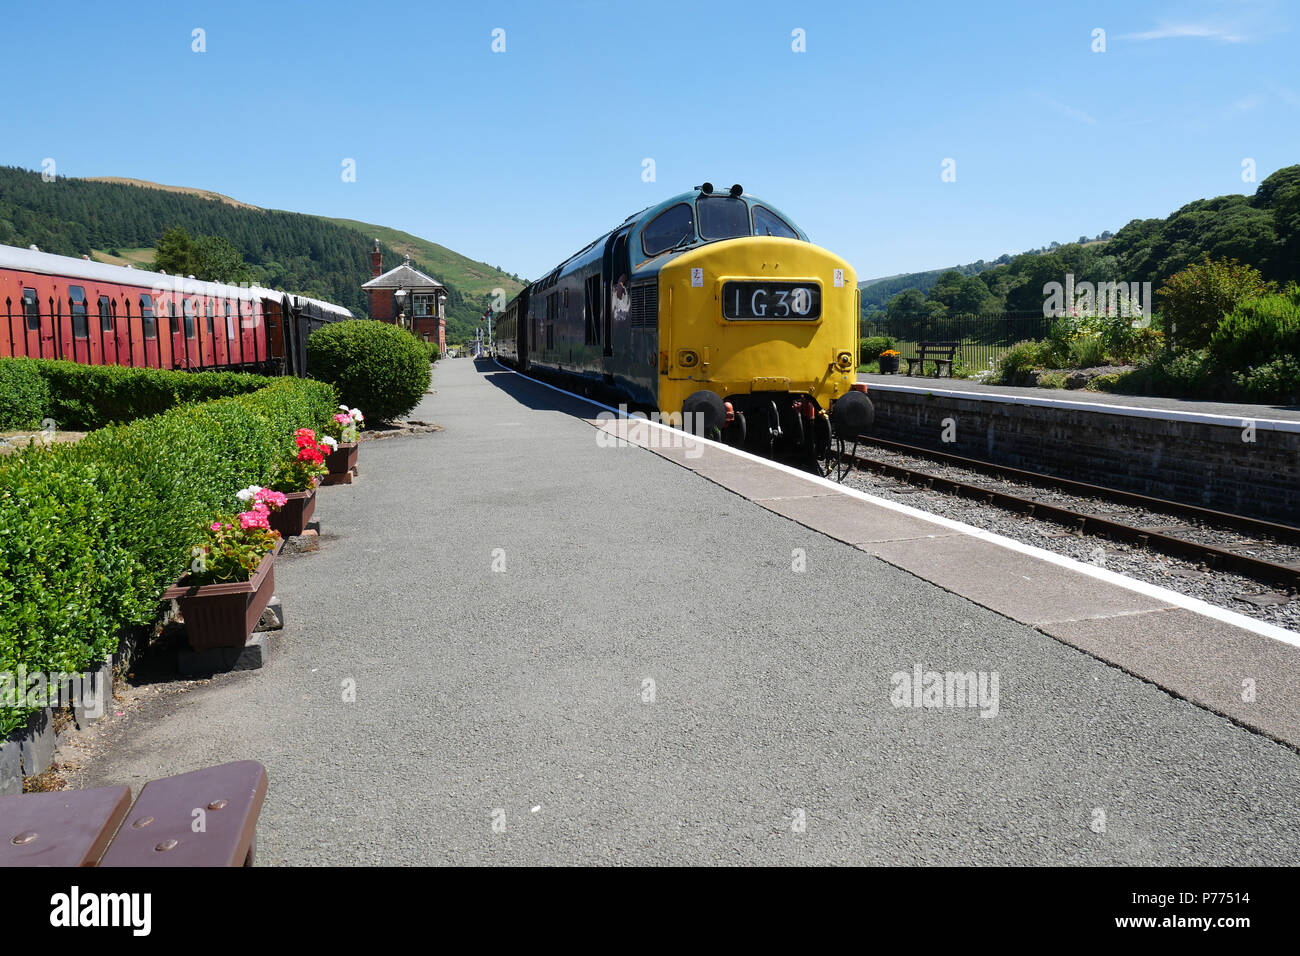 July 03 2018 - Carrog railway station,Wales, UK. with a Class 37 Locomotive group (C37LG) English Electric Type 3. V12 Engine 1700 bhp. Stock Photo